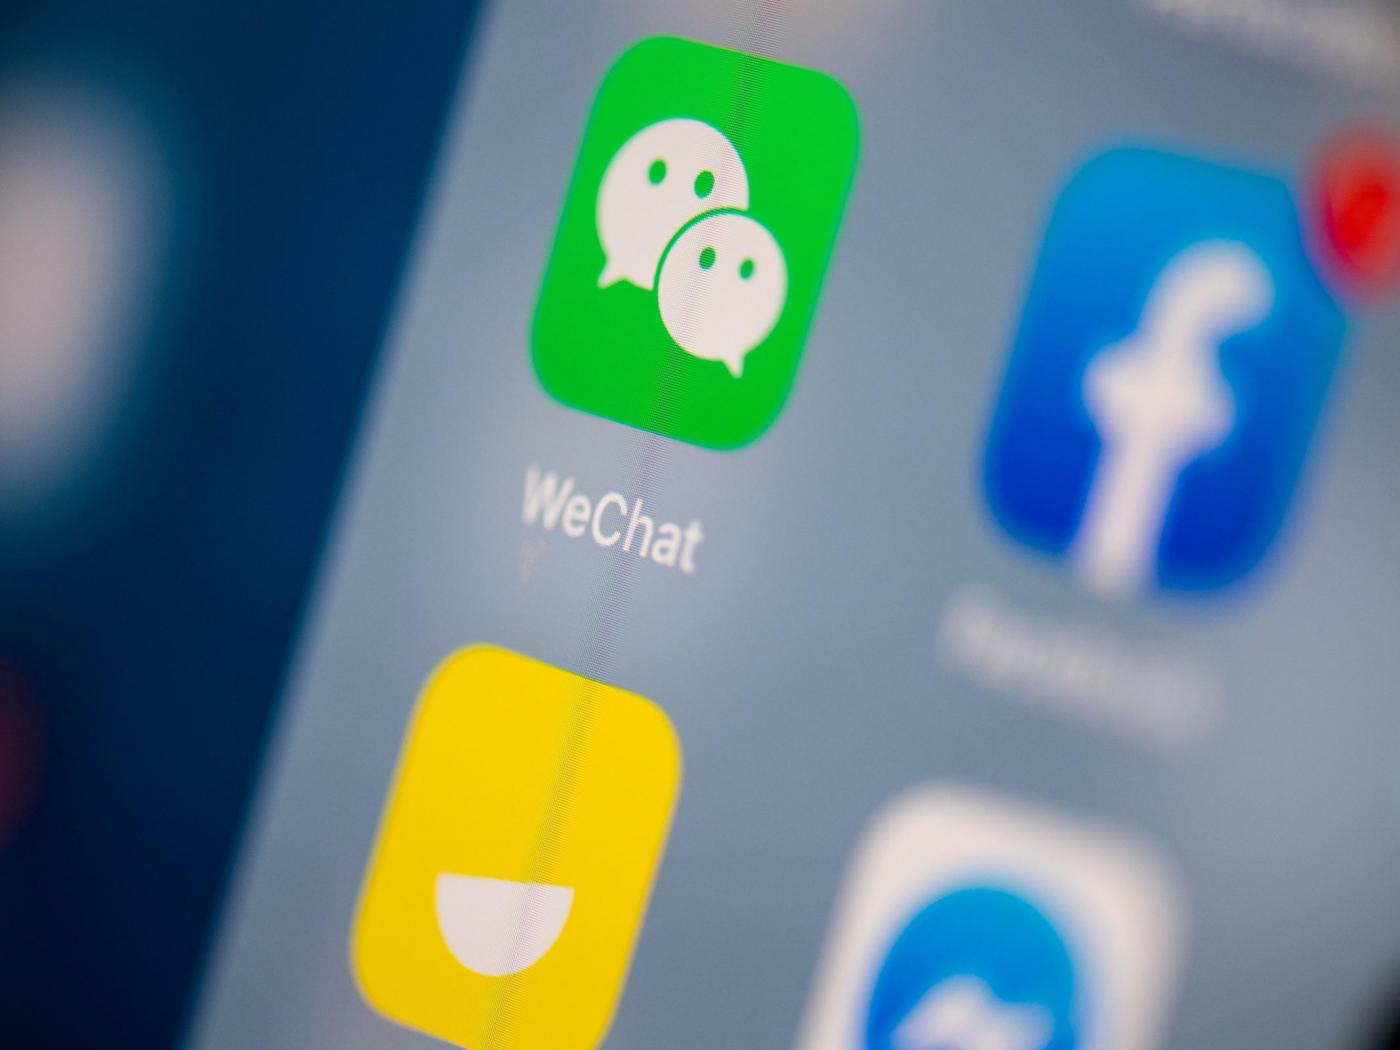 Owned By Tencent, One Of China S Biggest Companies, - Wechat China - HD Wallpaper 